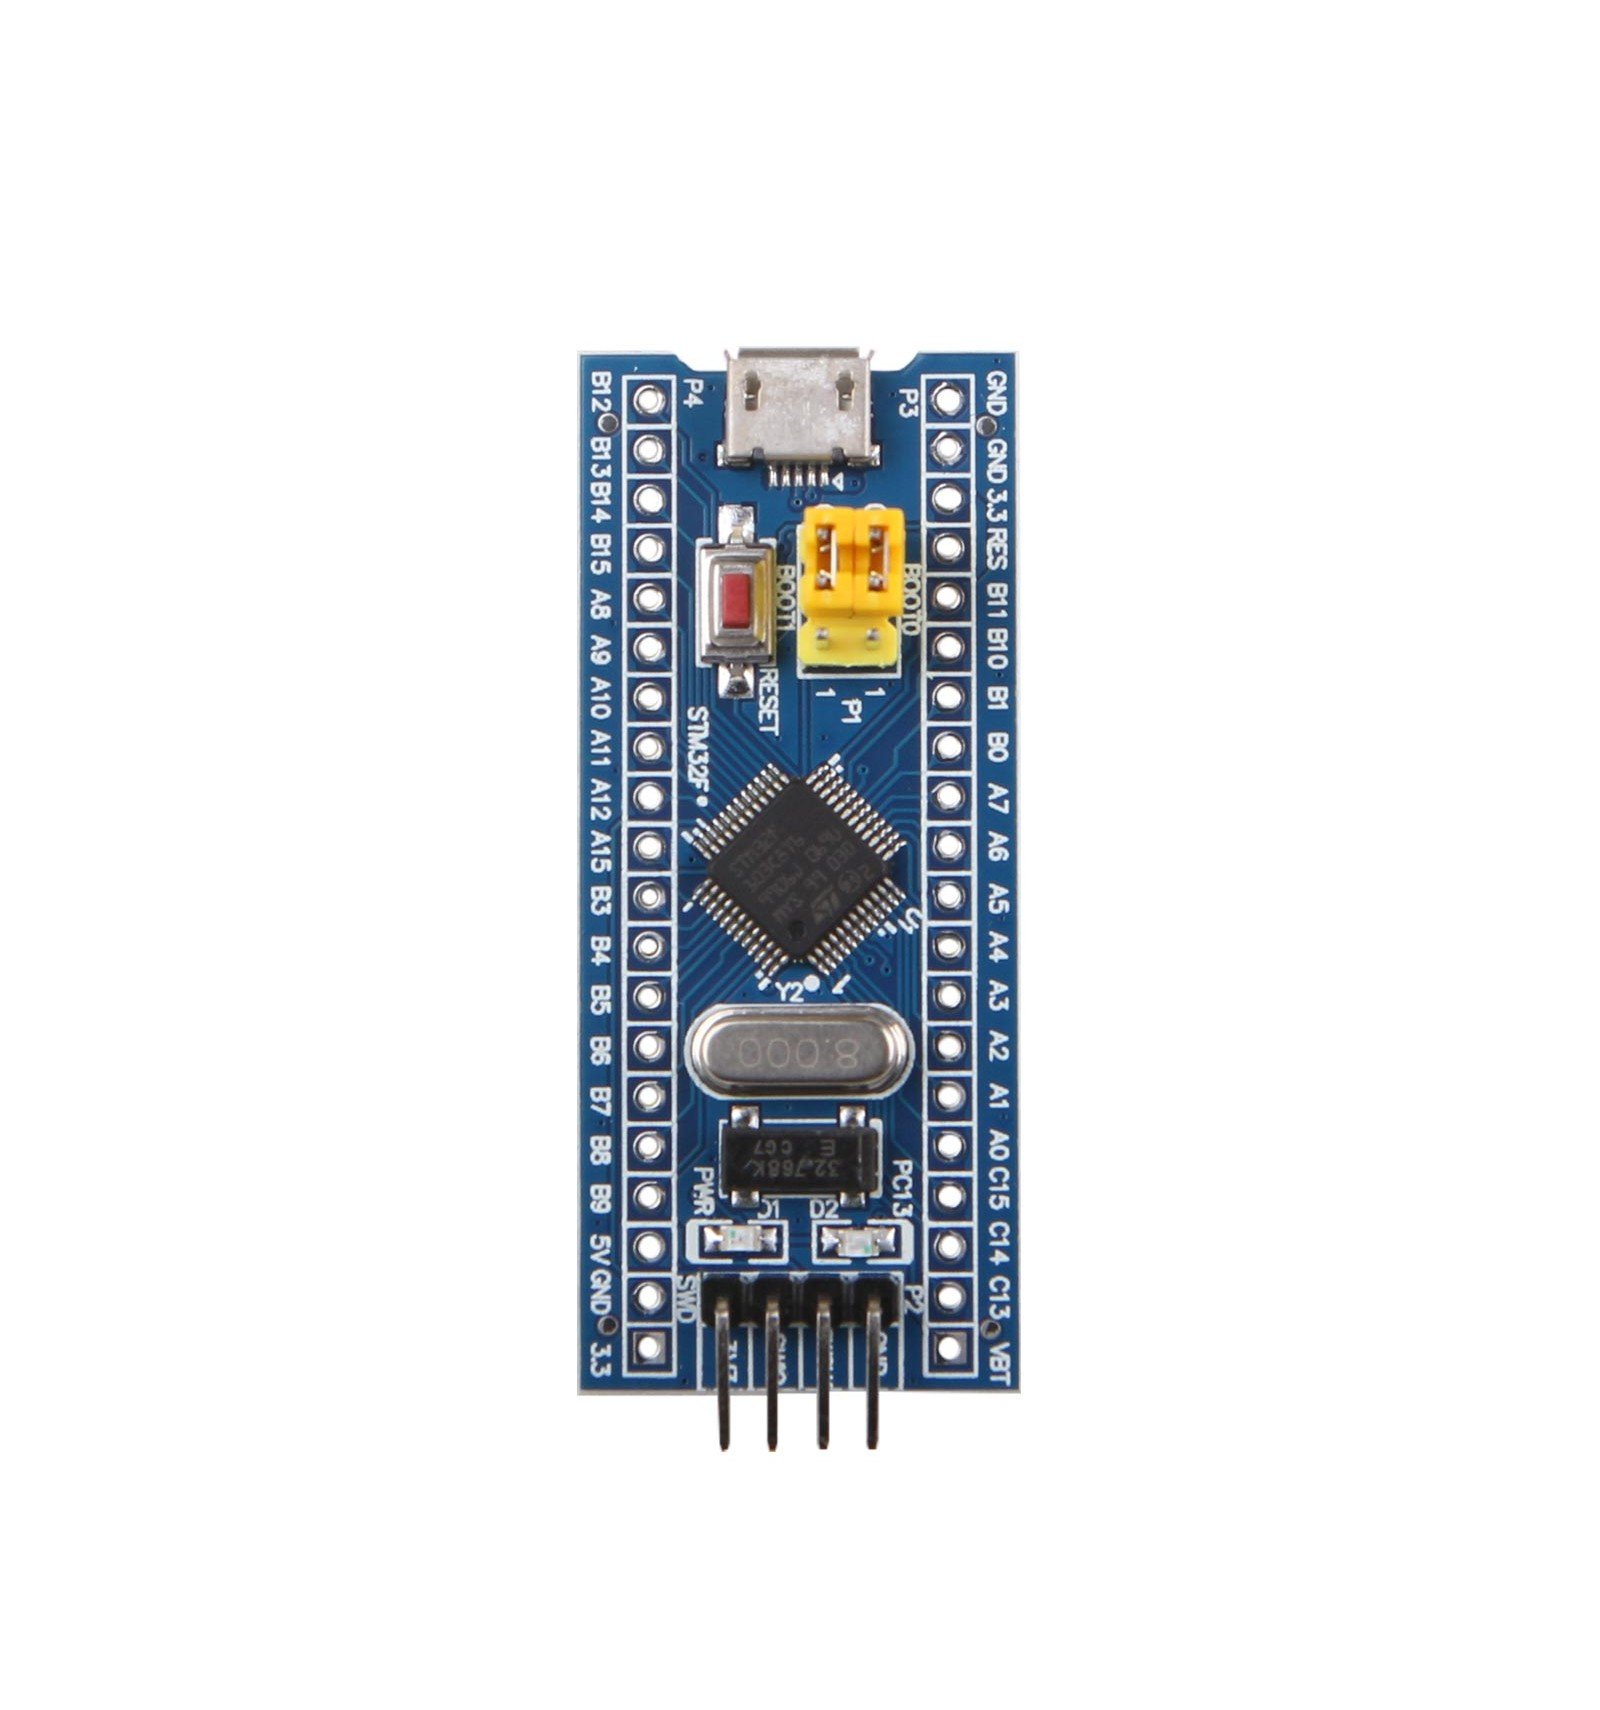 Development Board For Arm Microcontroller Stm F C T